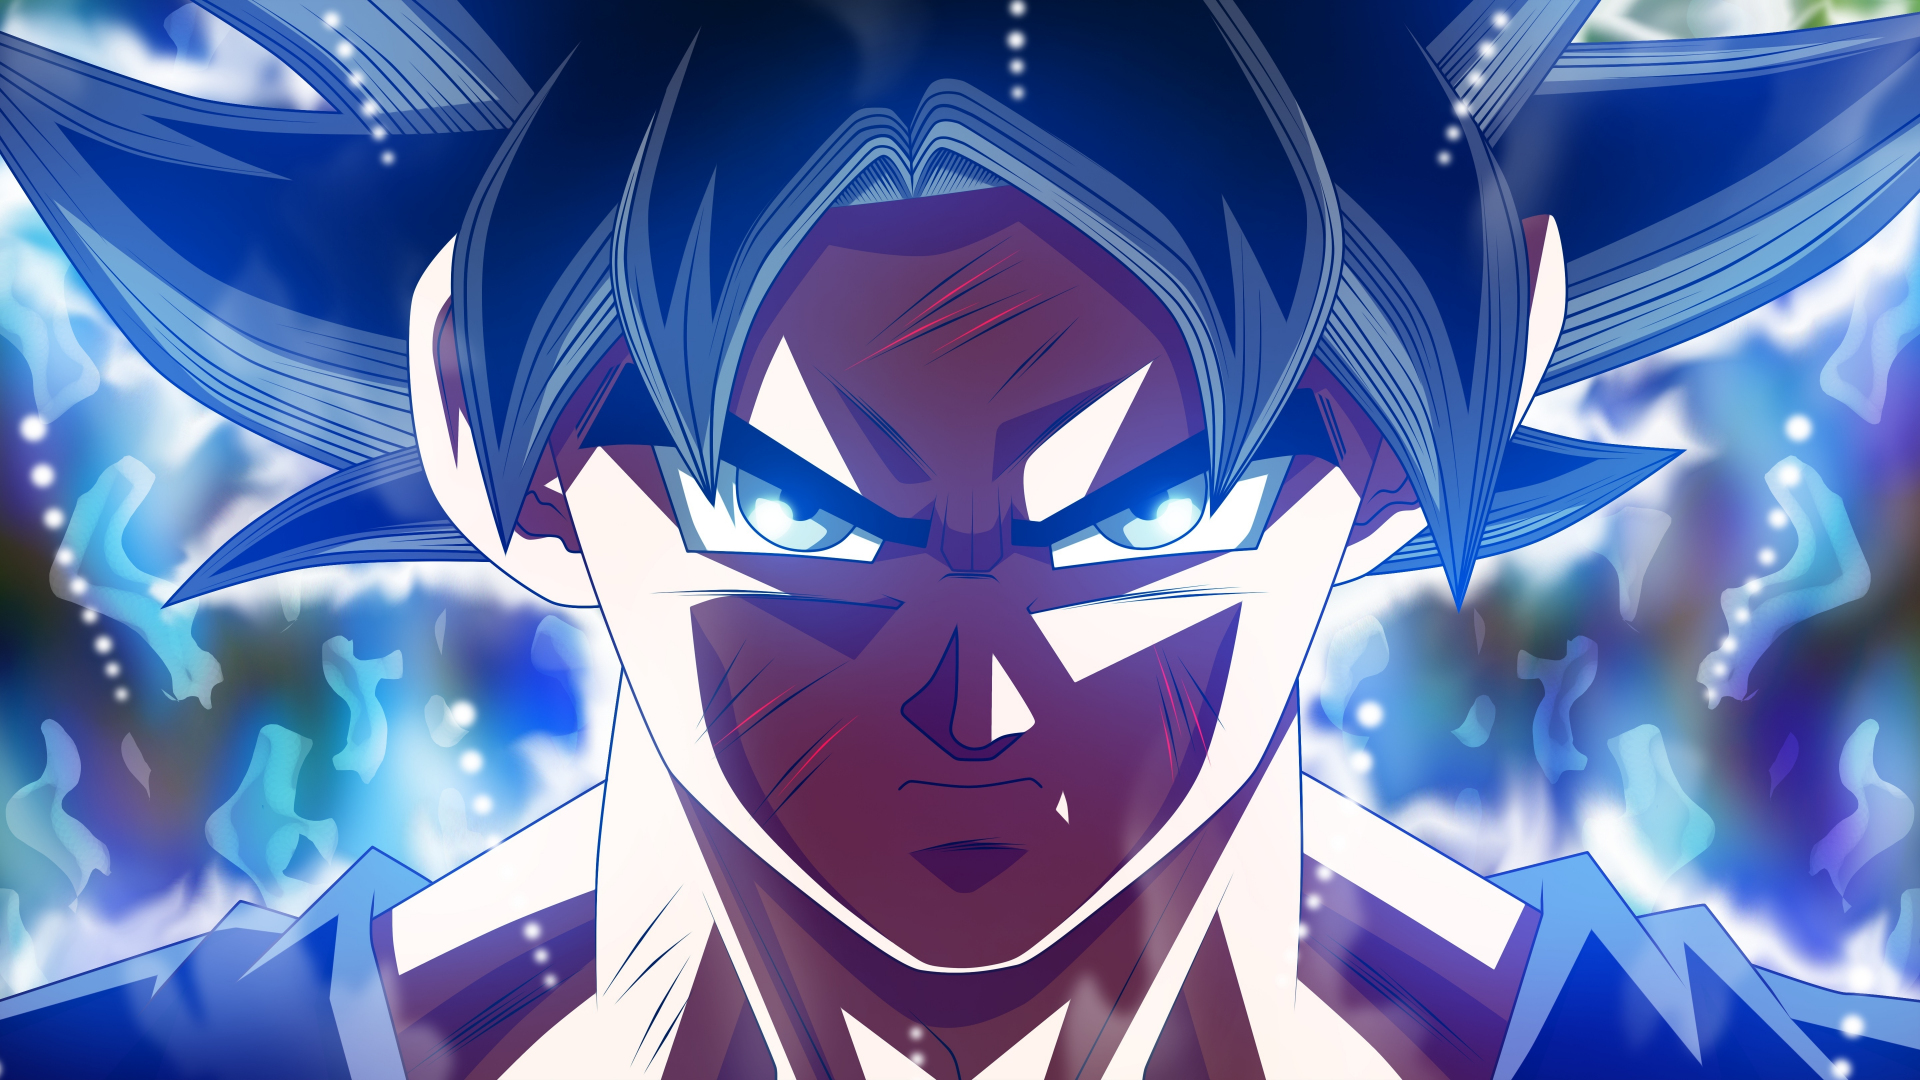 Download 1920x1080 wallpaper wounded, son goku, ultra instinct, dragon ball super, full hd, hdtv, fhd, 1080p, 1920x1080 HD image, background, 4626